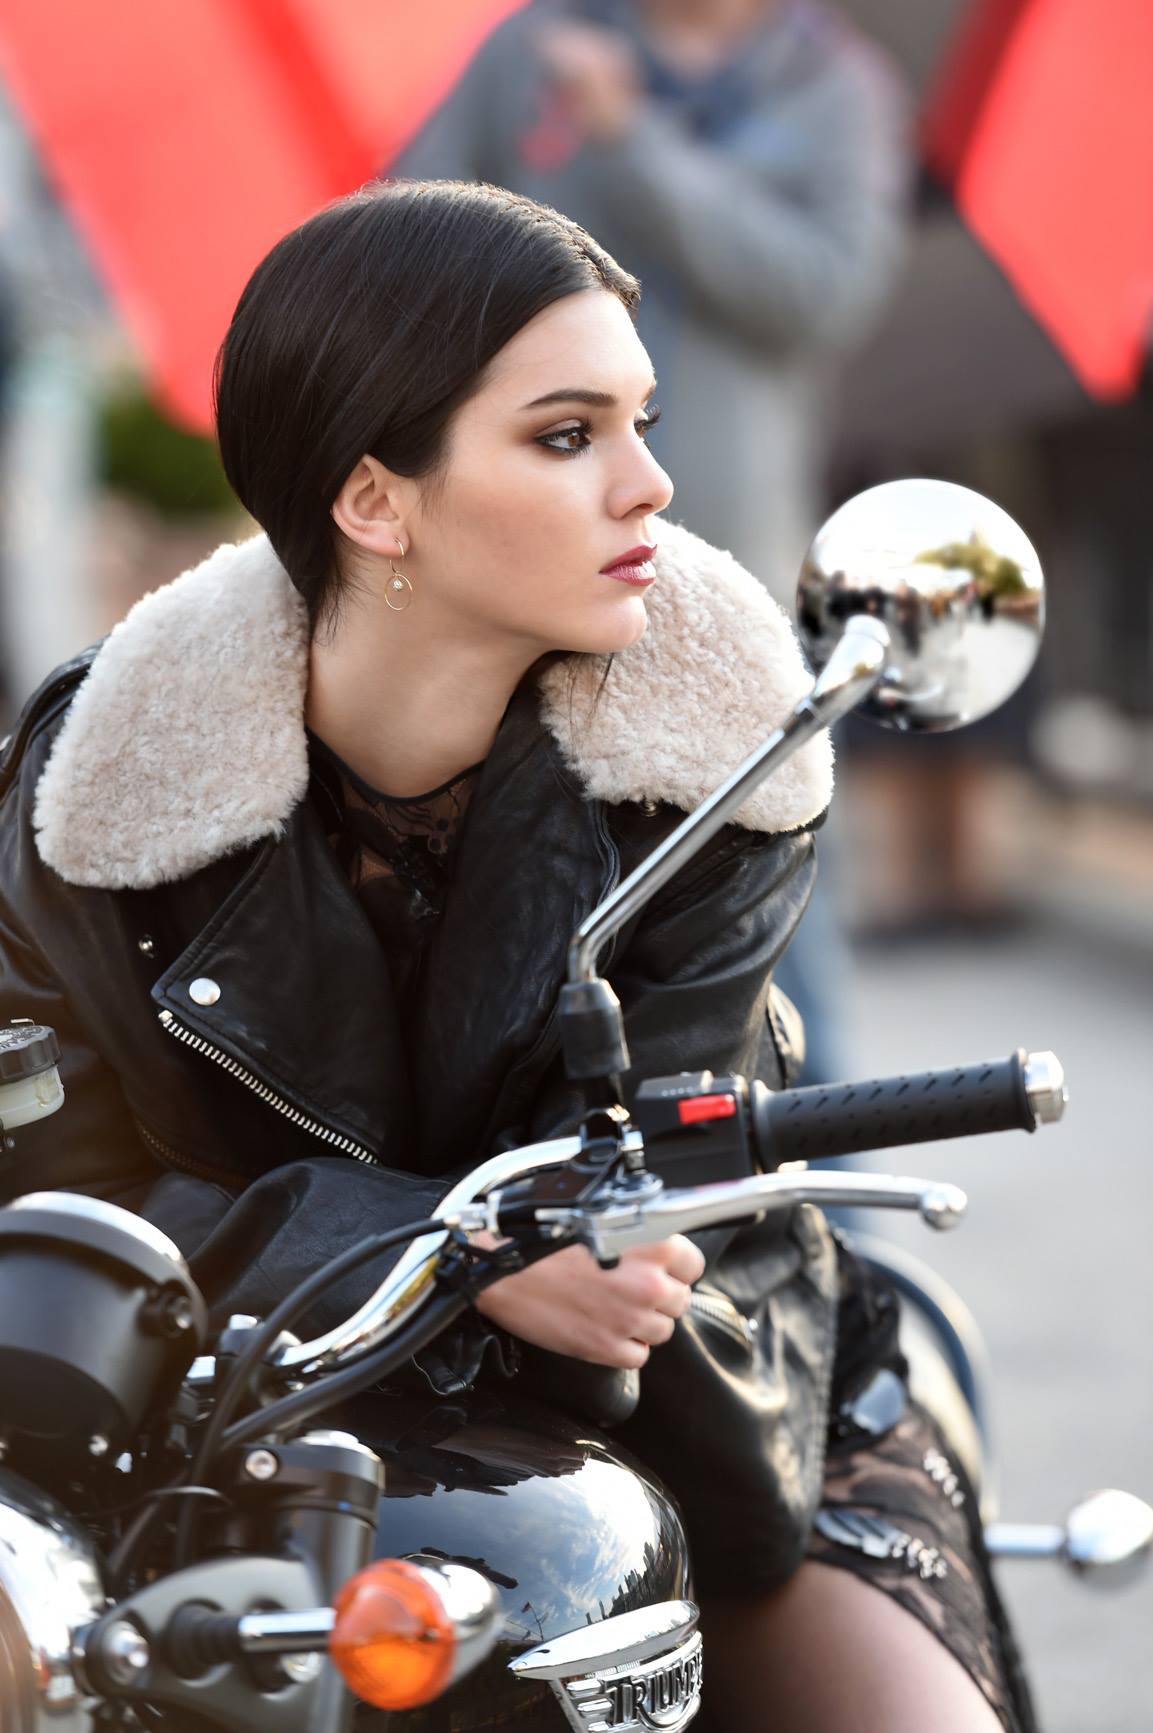 Kendall Jenner Women Model Brunette Motorcycle Women With Bikes Looking Into The Distance Sitting Tr 1153x1733